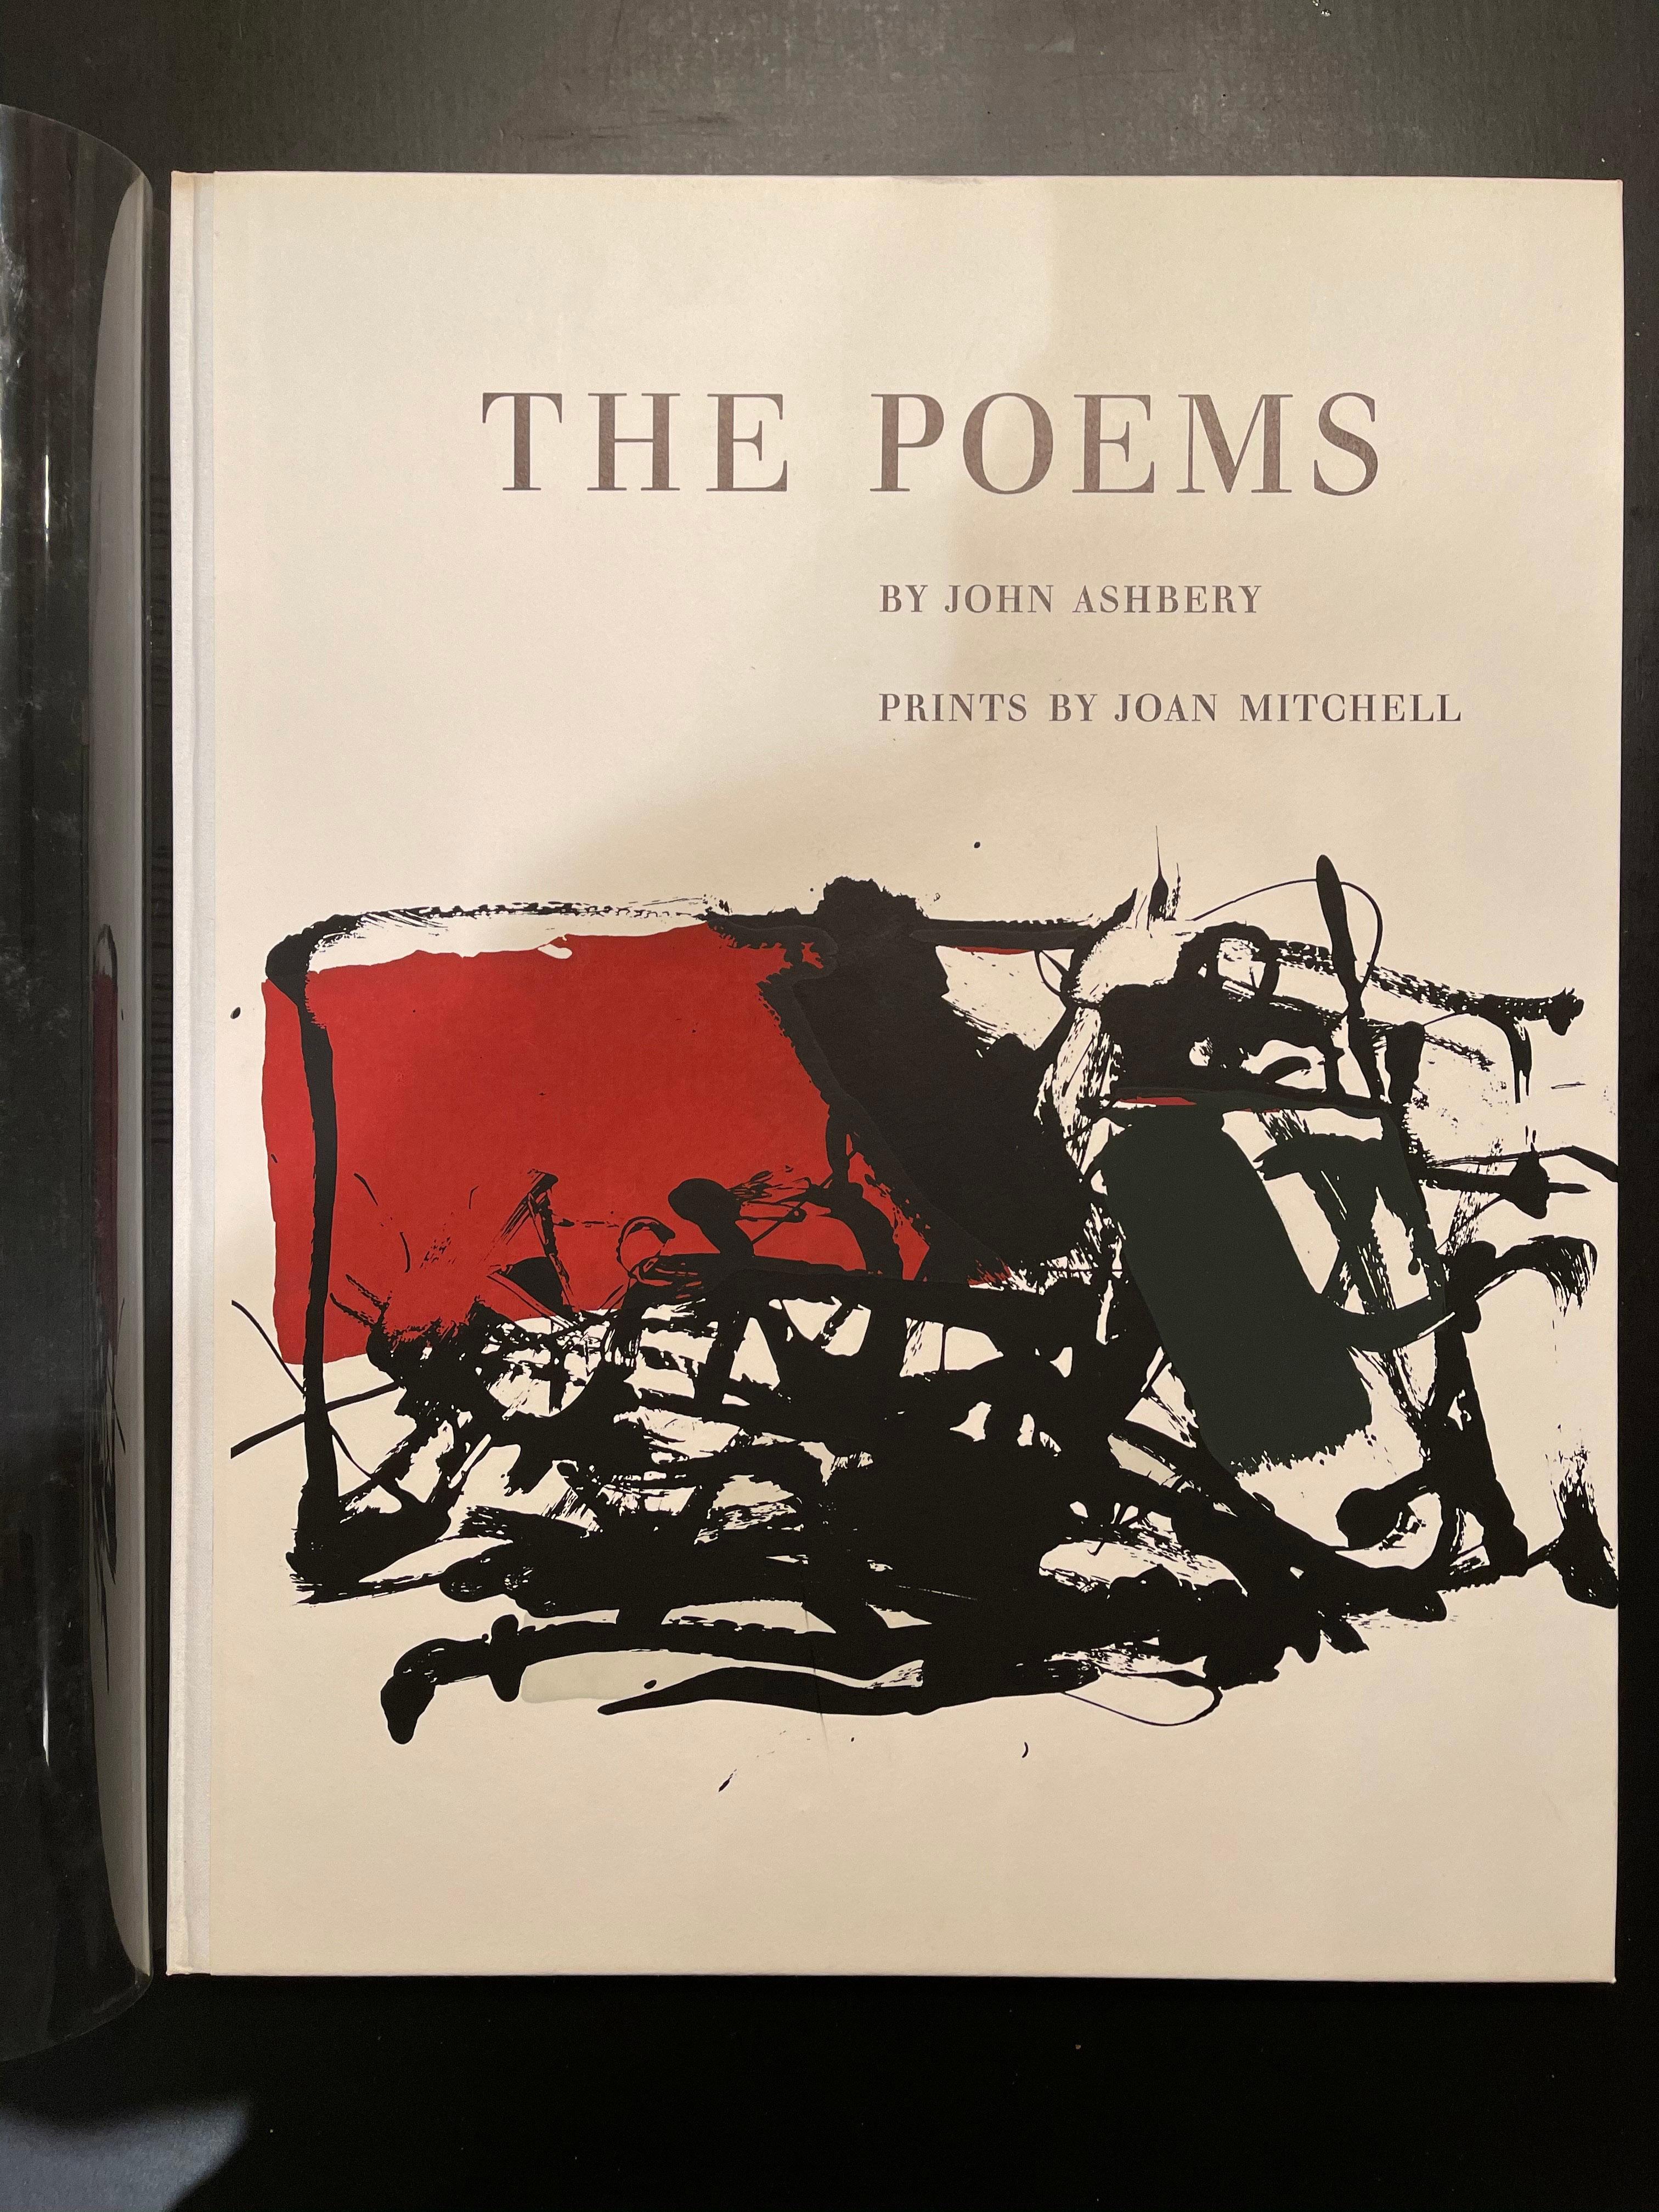 Joan Mitchell Abstract Print - THE NEW YORK SCHOOL: THE POEMS - SALUTE - ODES - PERMANENTLY